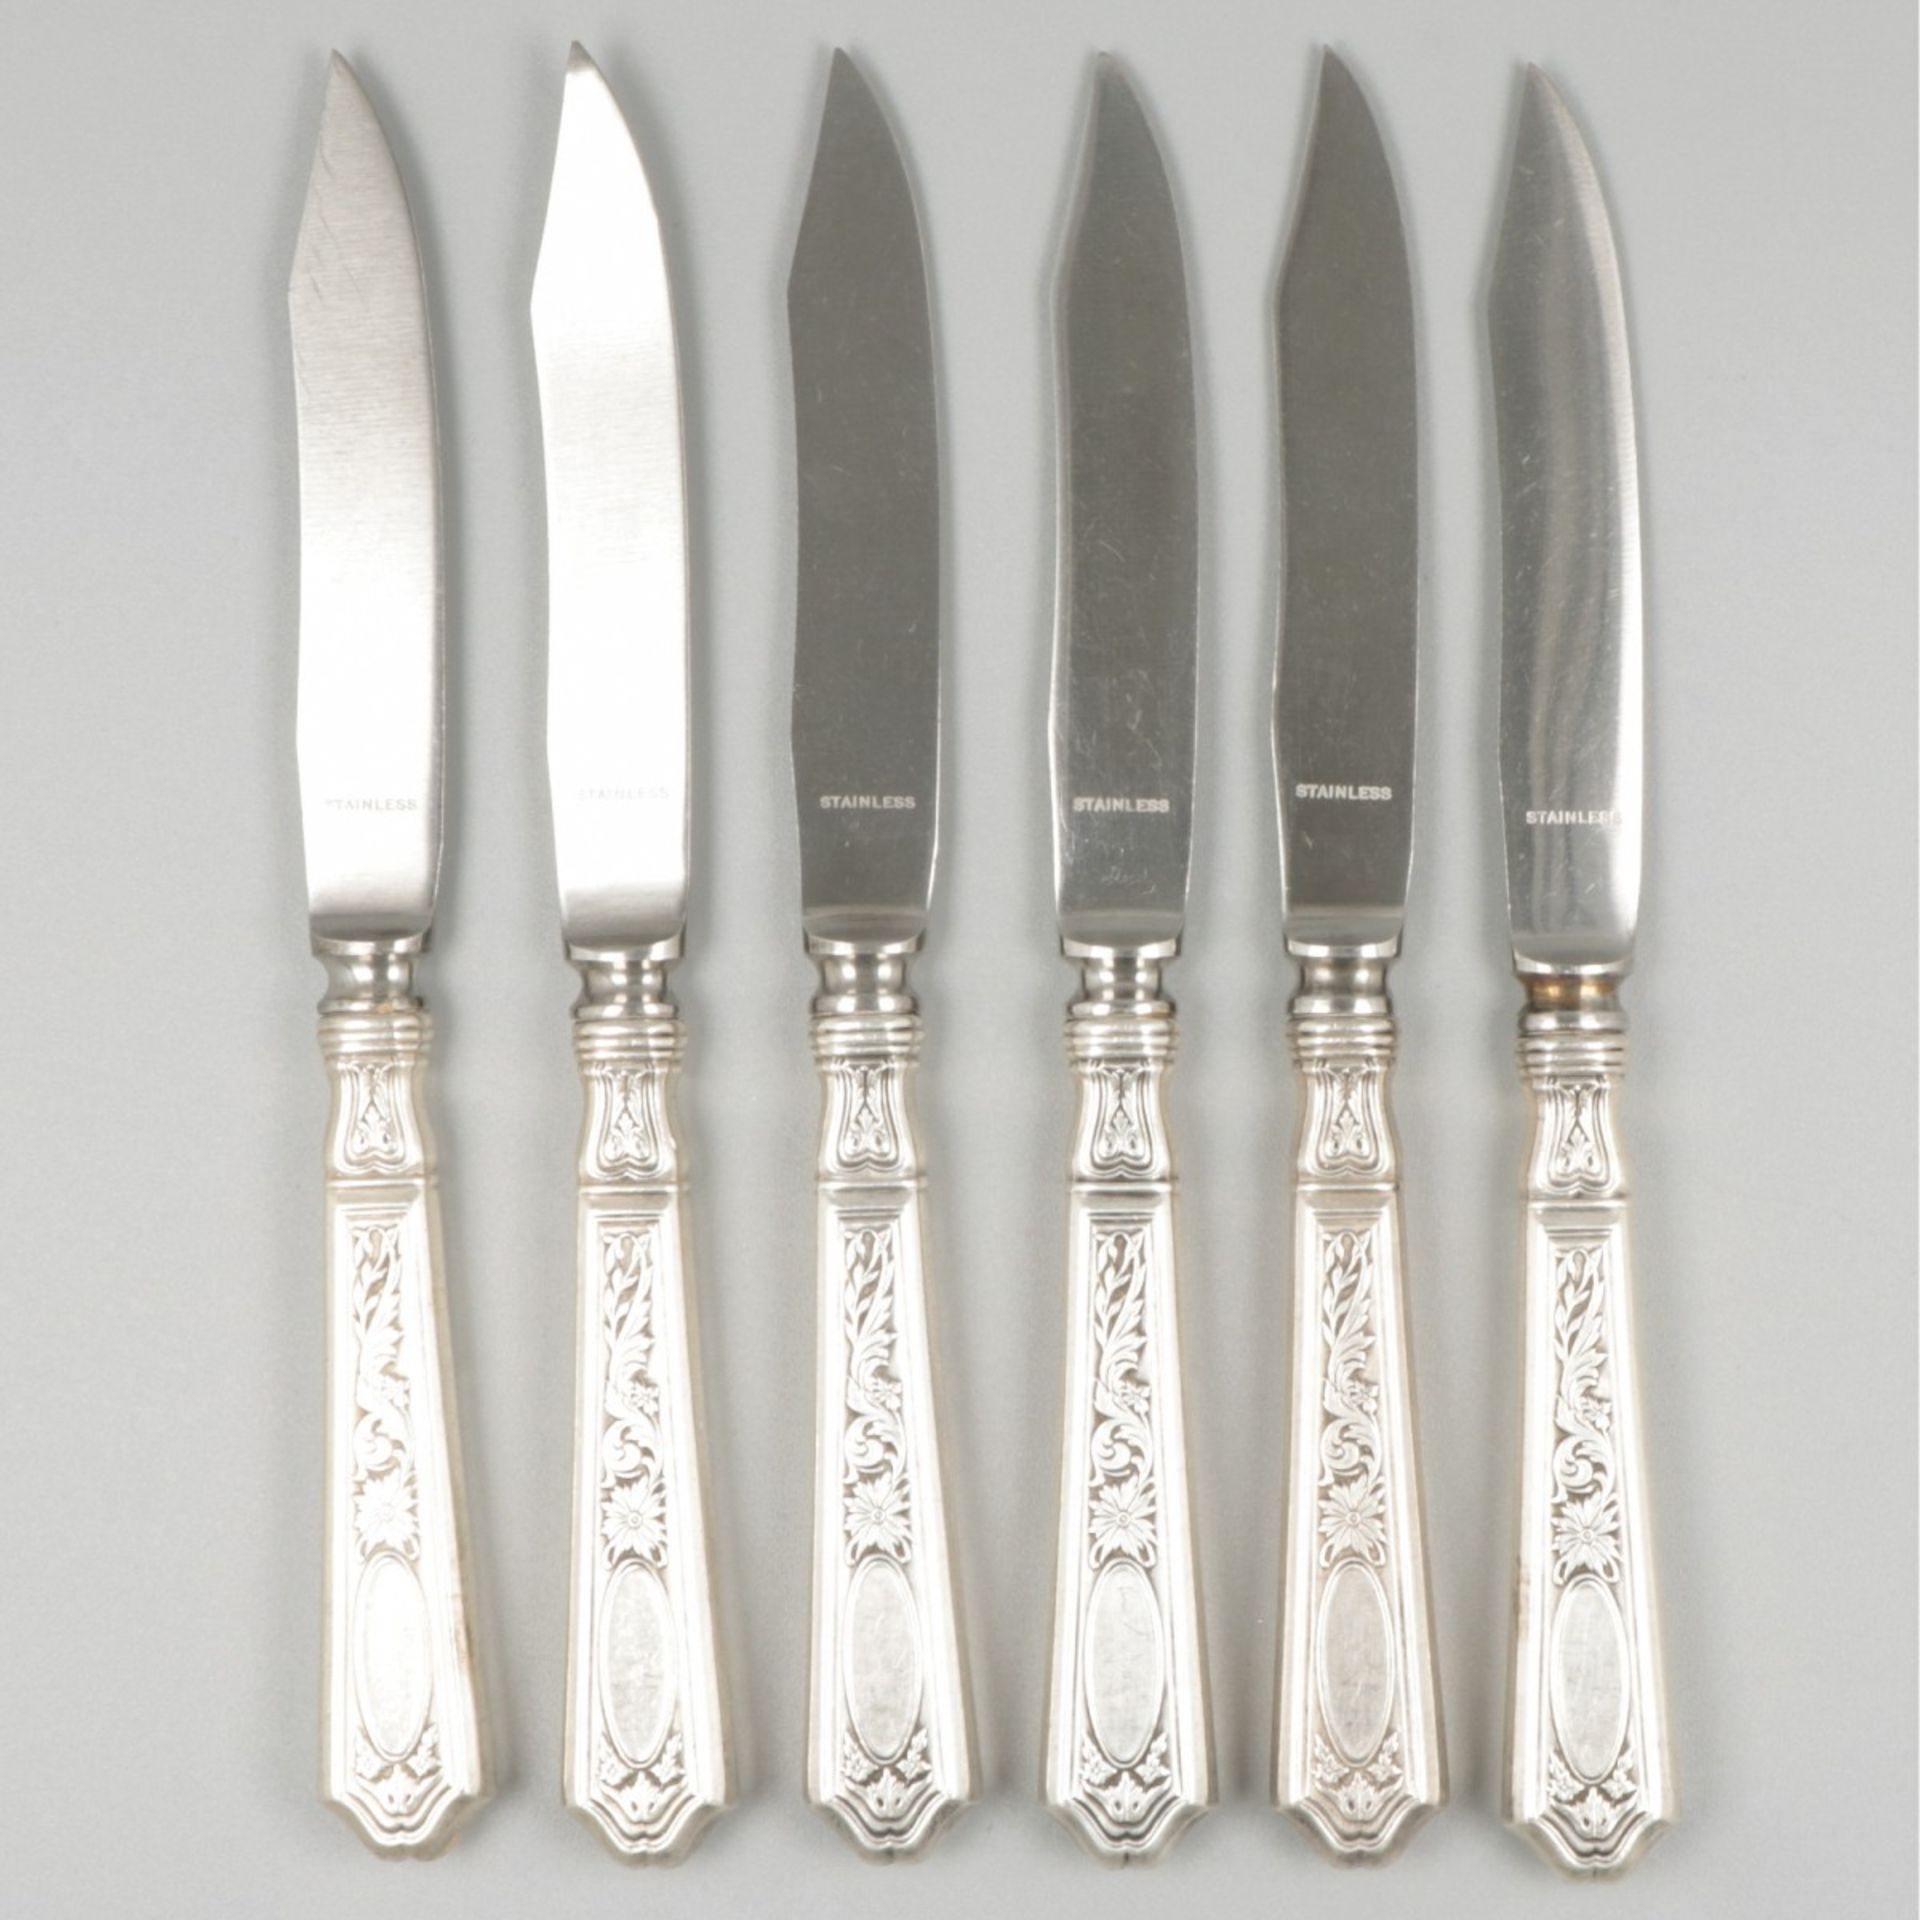 6-piece set of knives silver.